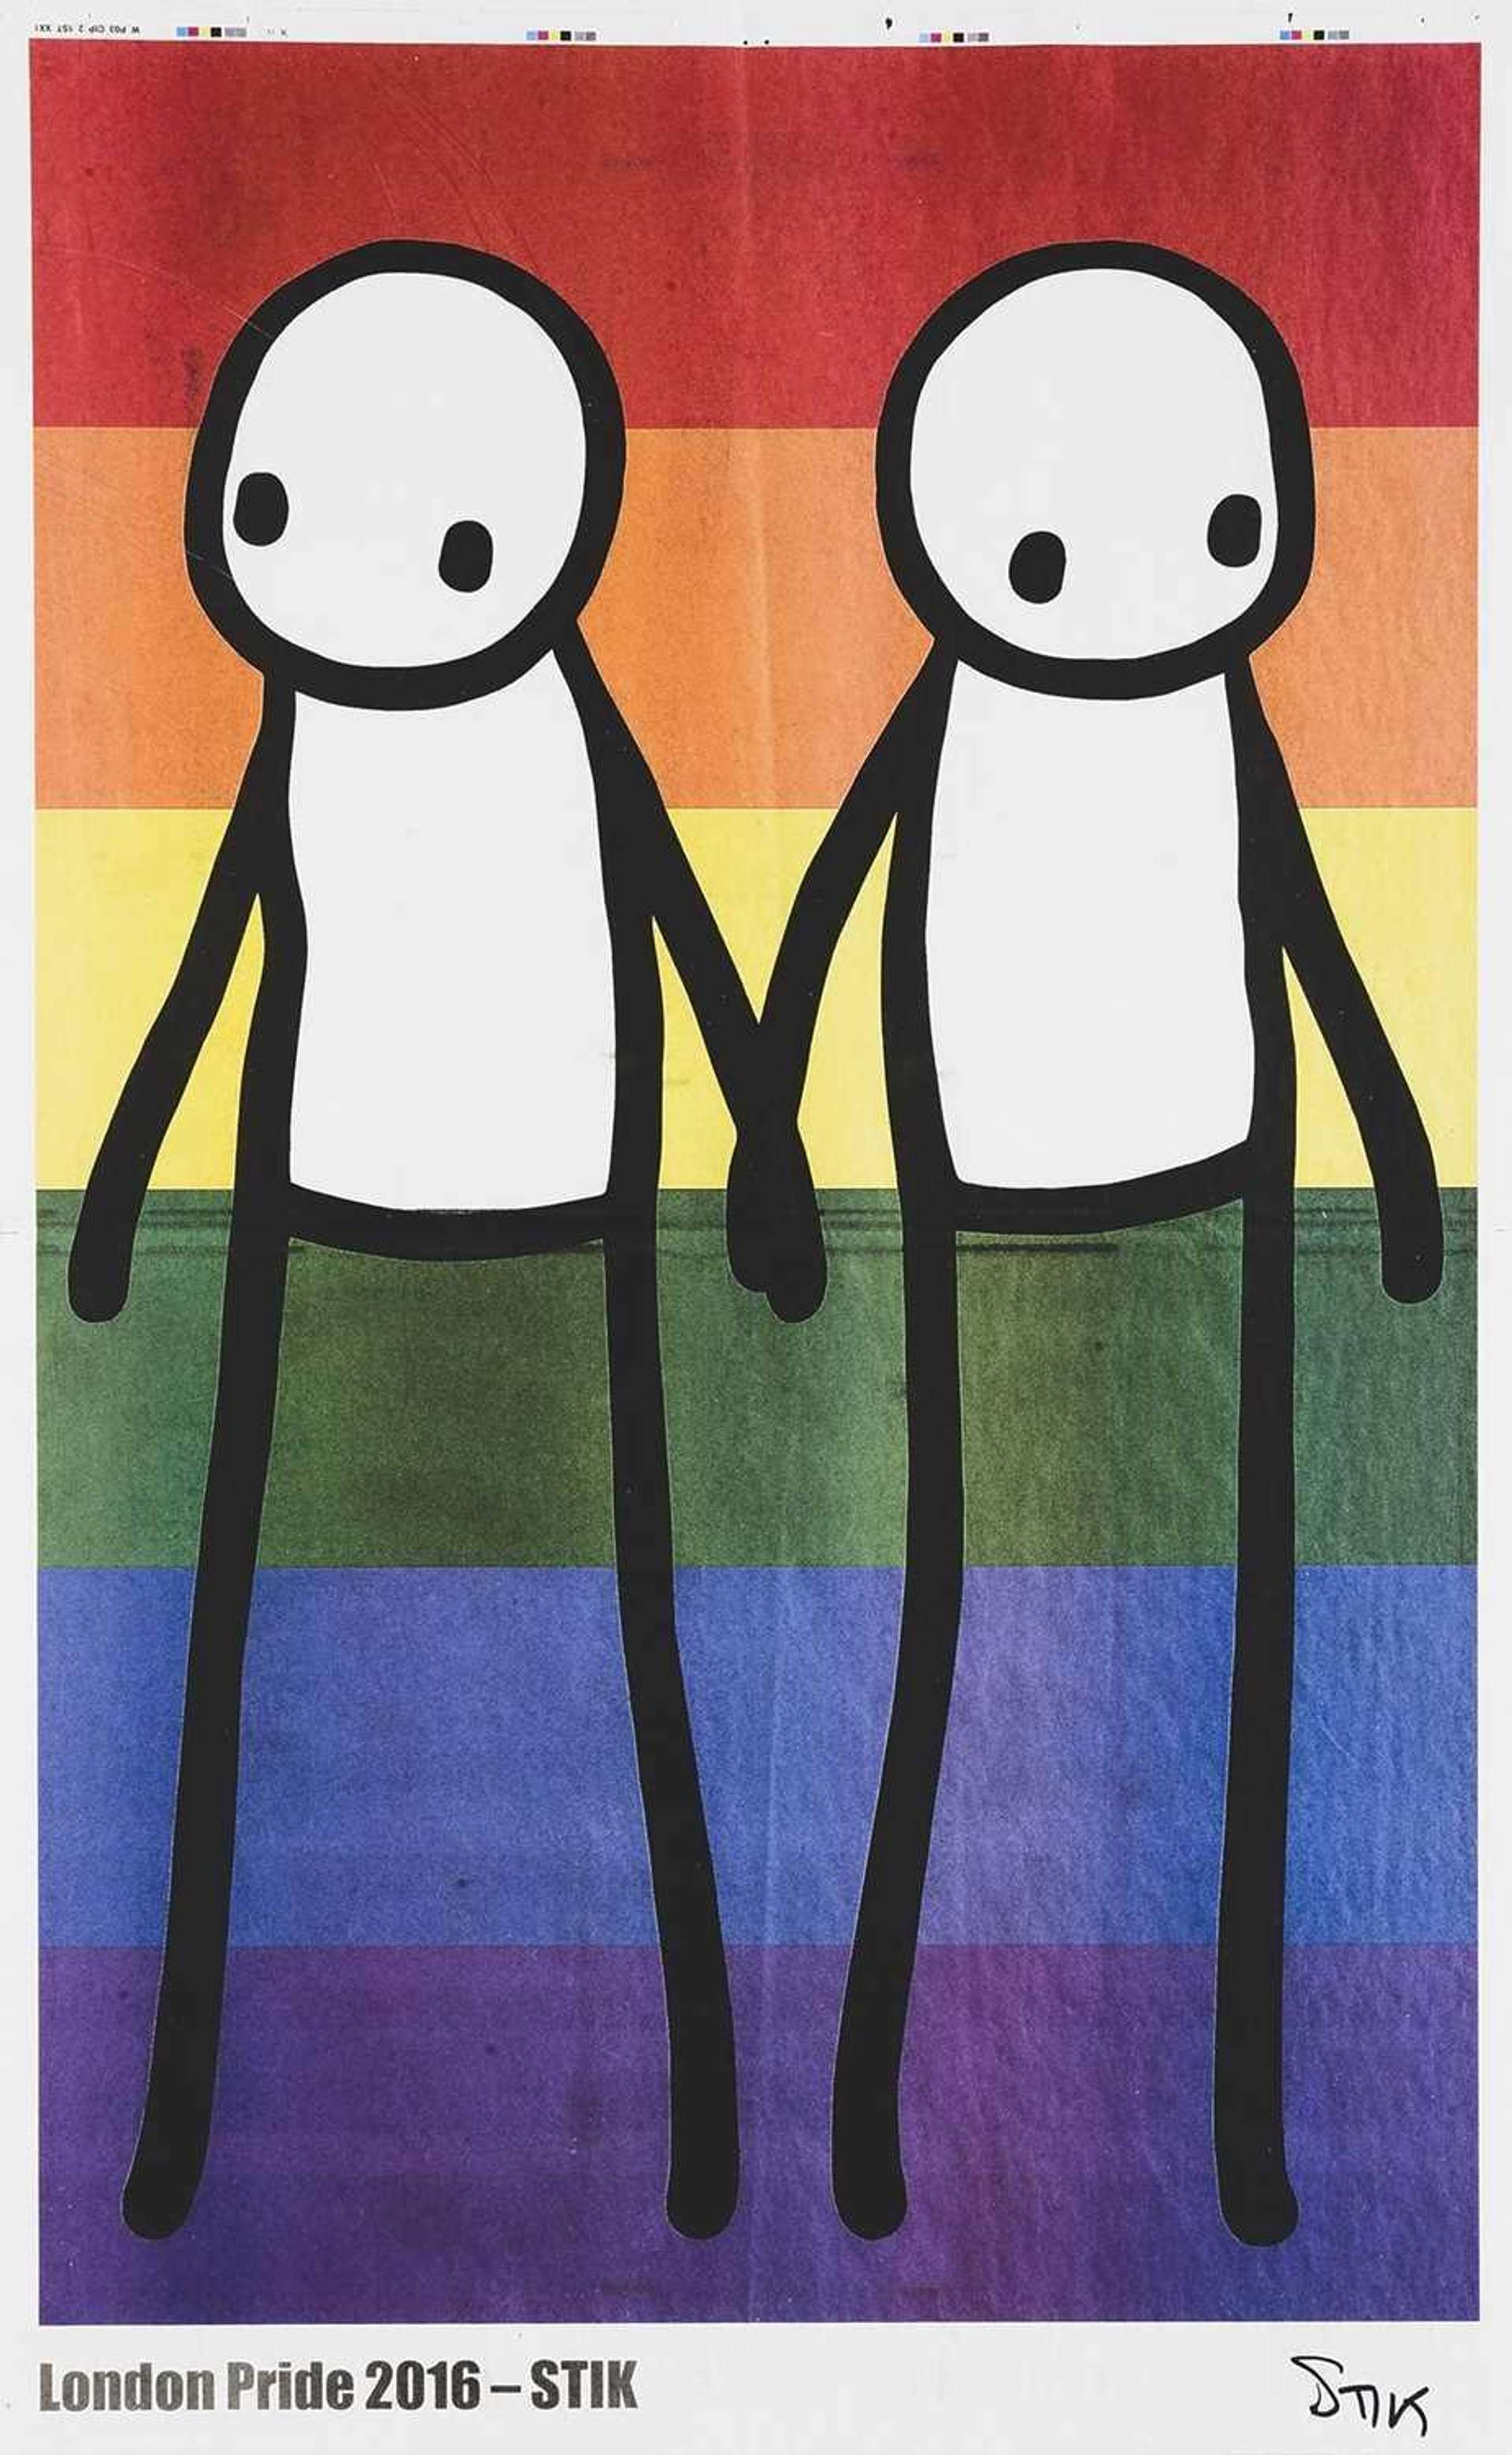 Pride by Stik (2019). The print features two stick figures holding hands, in front of a pride flag. The text at the base reads "London Pride 2016 - STIK".